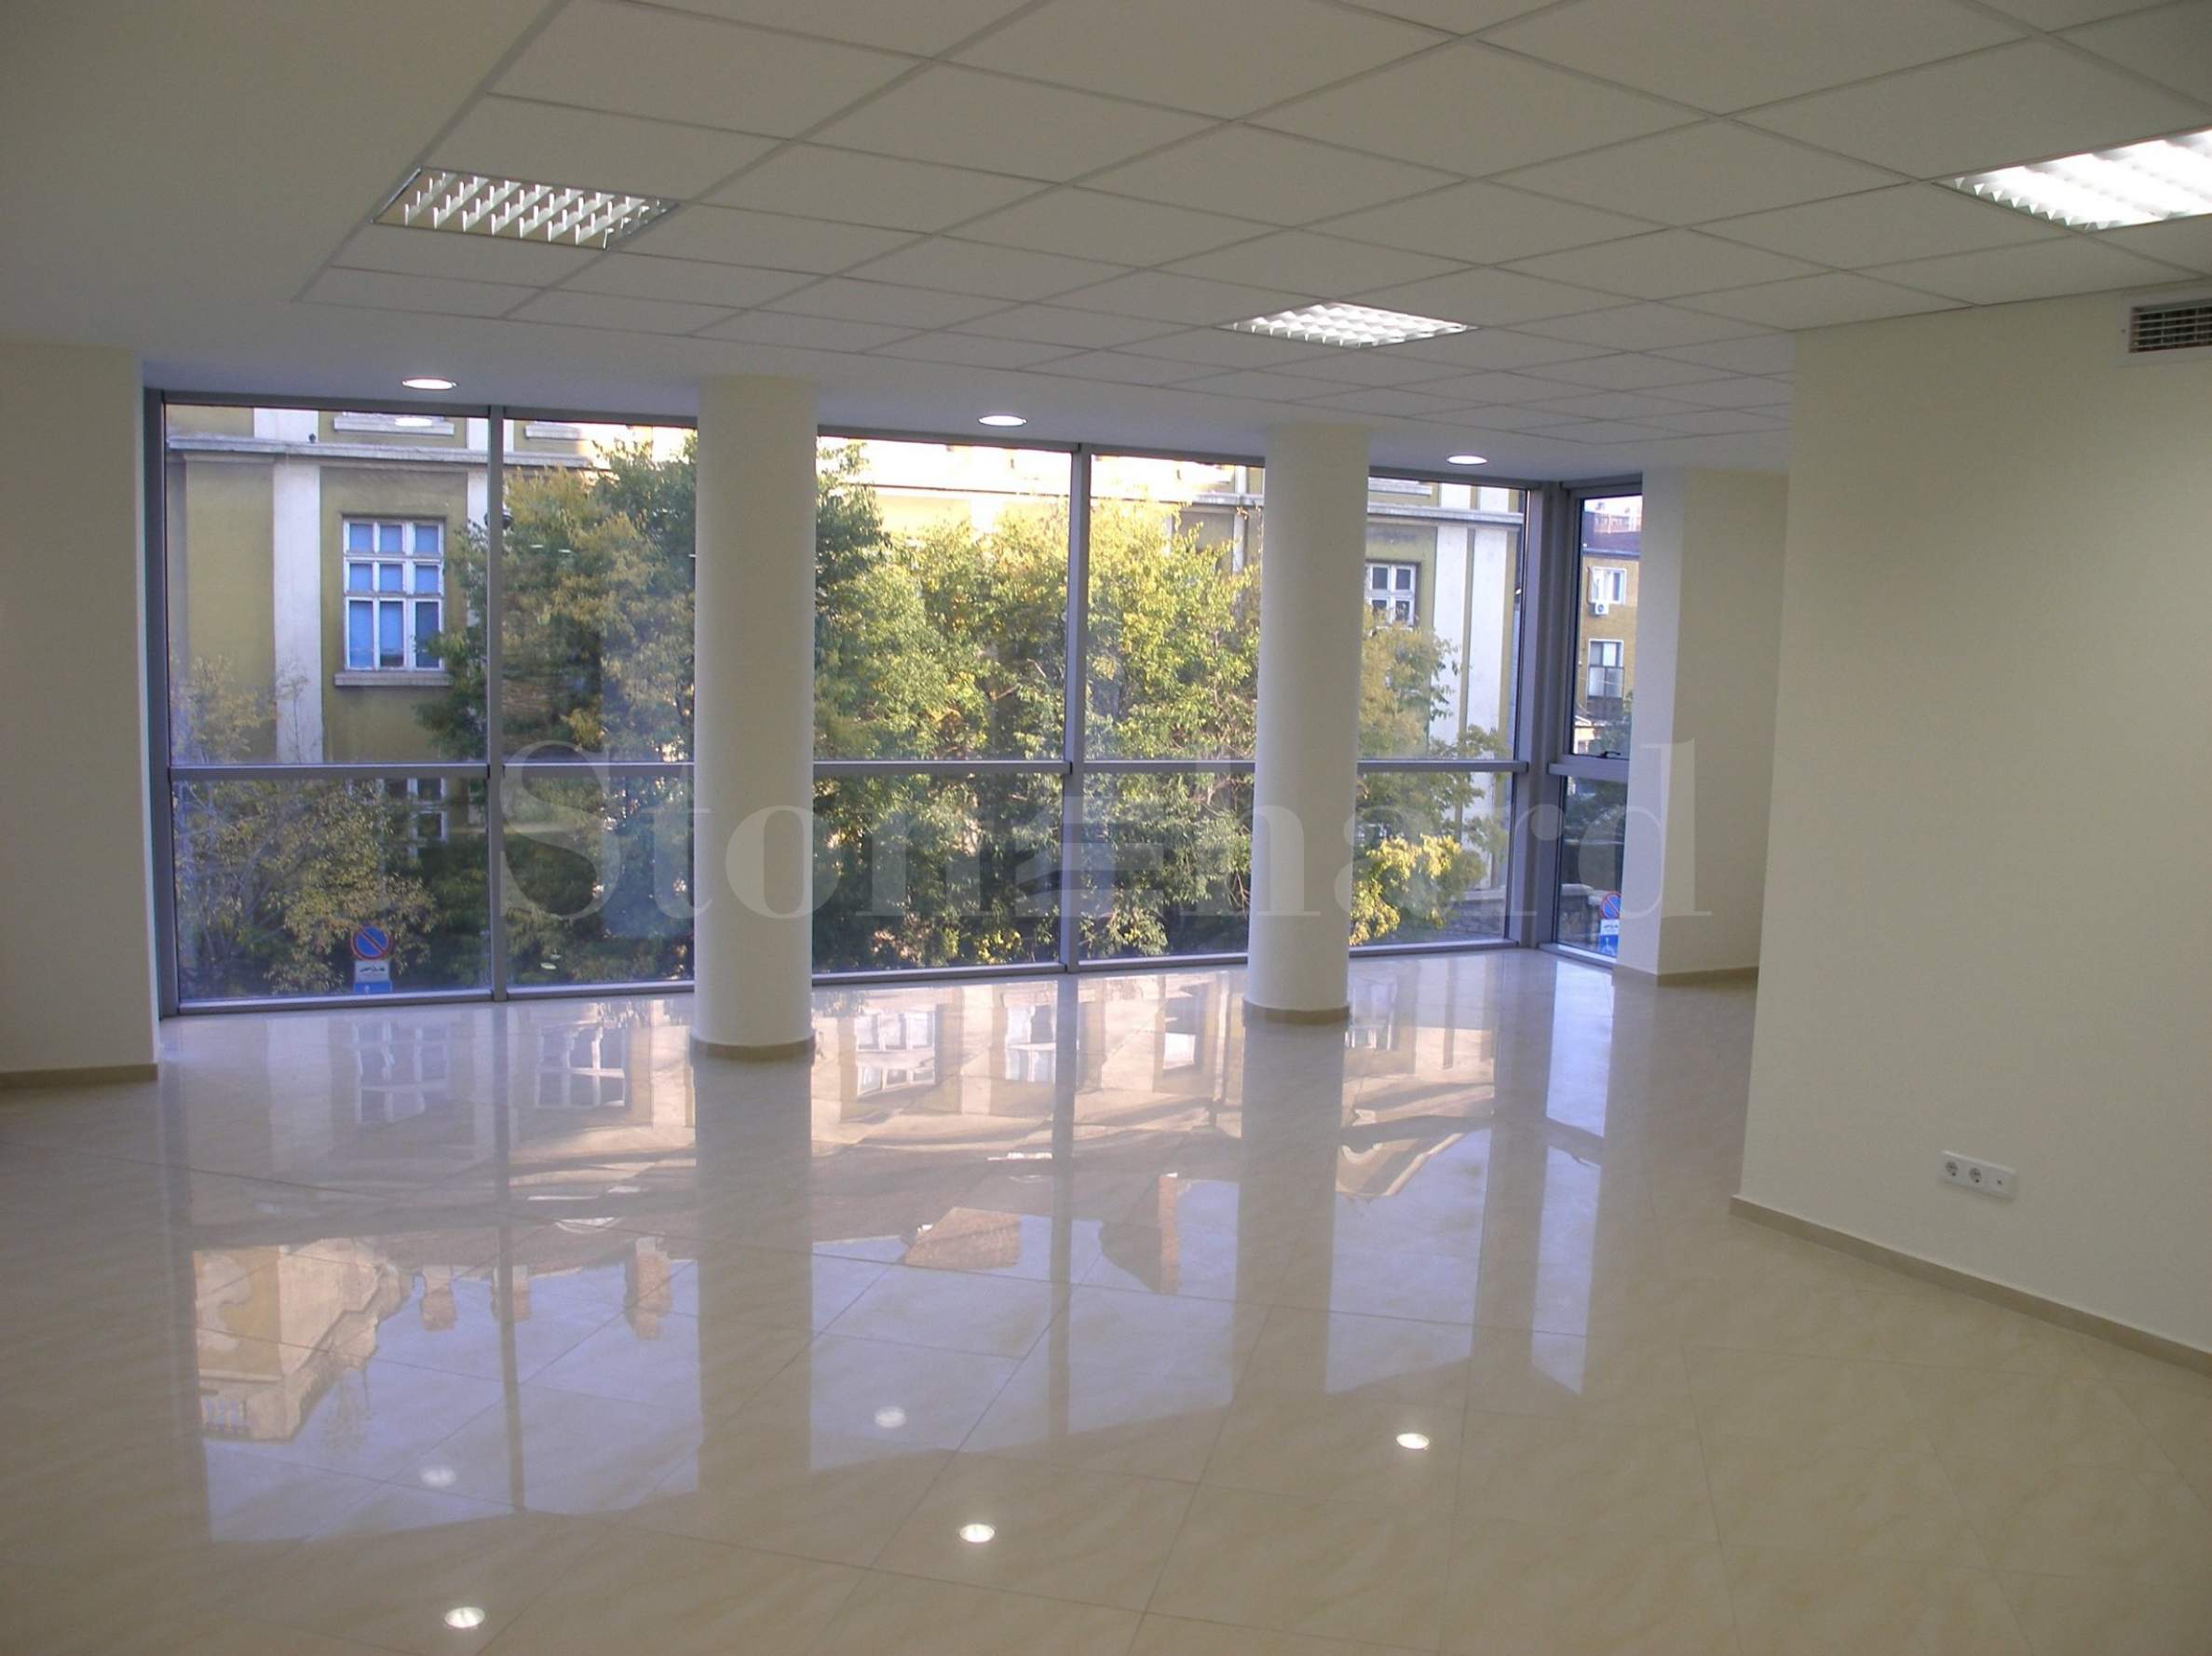 Offices in a nice business building in downtown Sofia2 - Stonehard